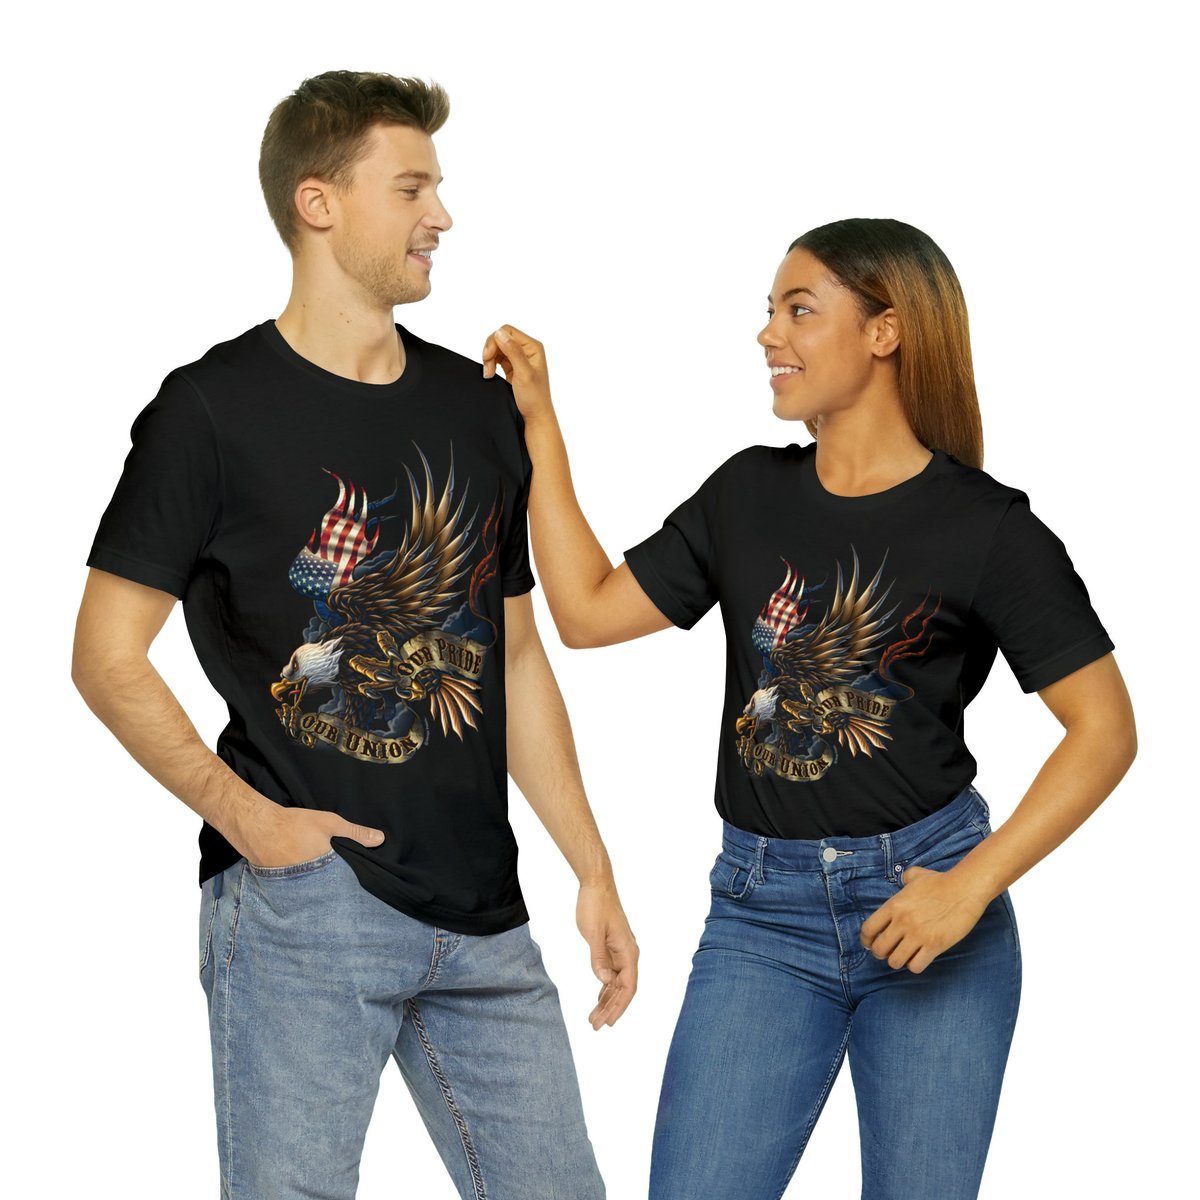 Excited to share the latest addition to my #etsy shop: American Eagle Pride Patriotic Shirt 
etsy.me/3P9bq4S #black #birthday #independenceday #streetwear #shortsleeve #crew #patrioticshirt #americanpride #gift